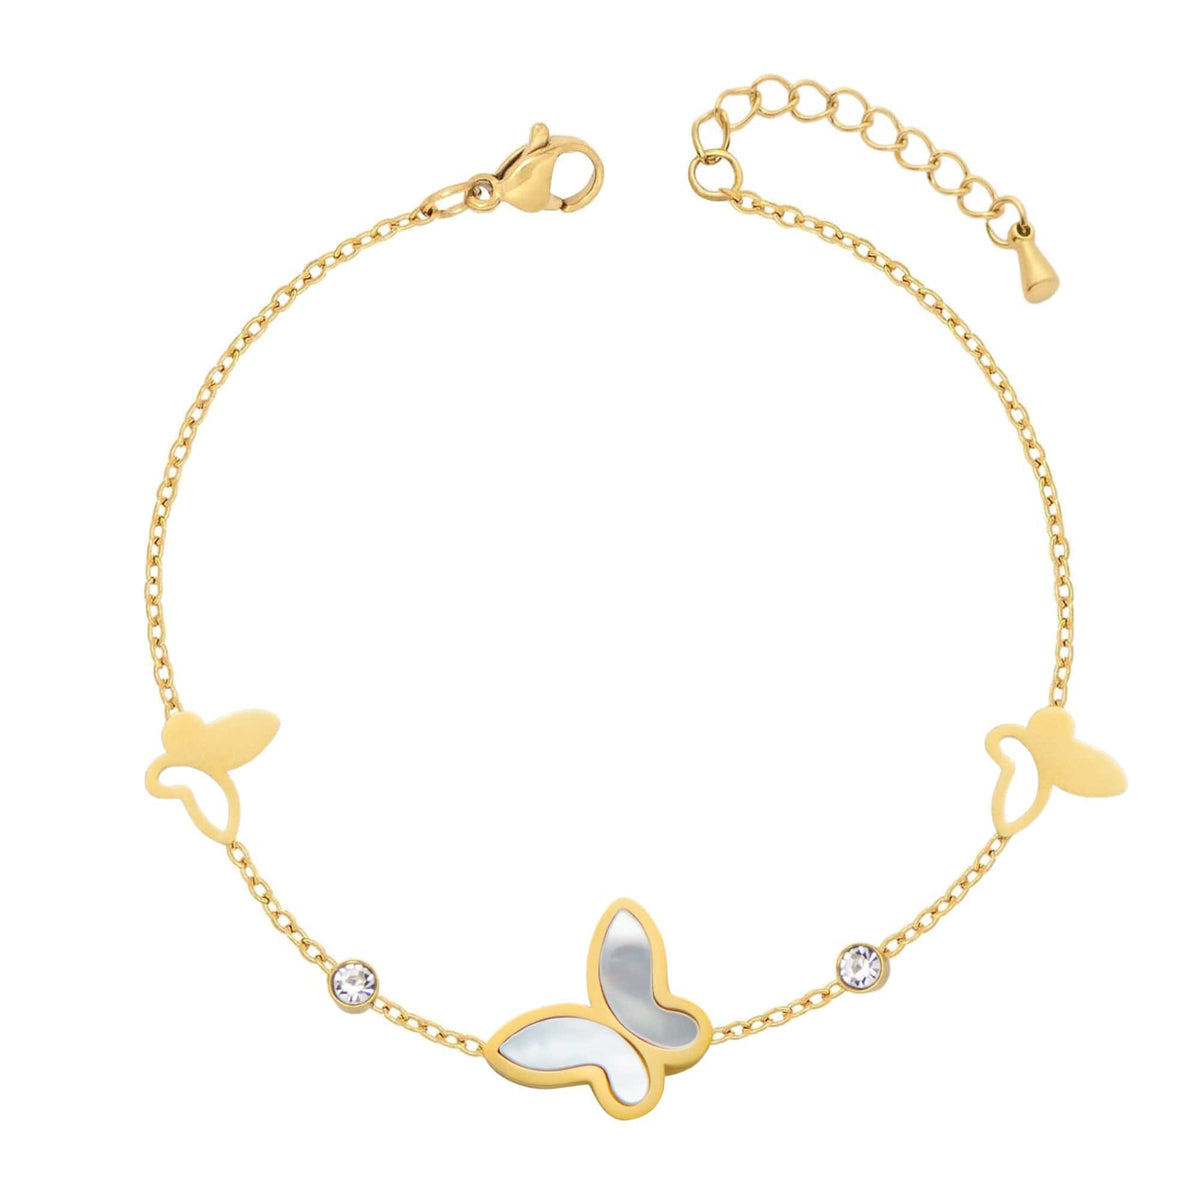 BohoMoon Stainless Steel Picnic Butterfly Bracelet Gold